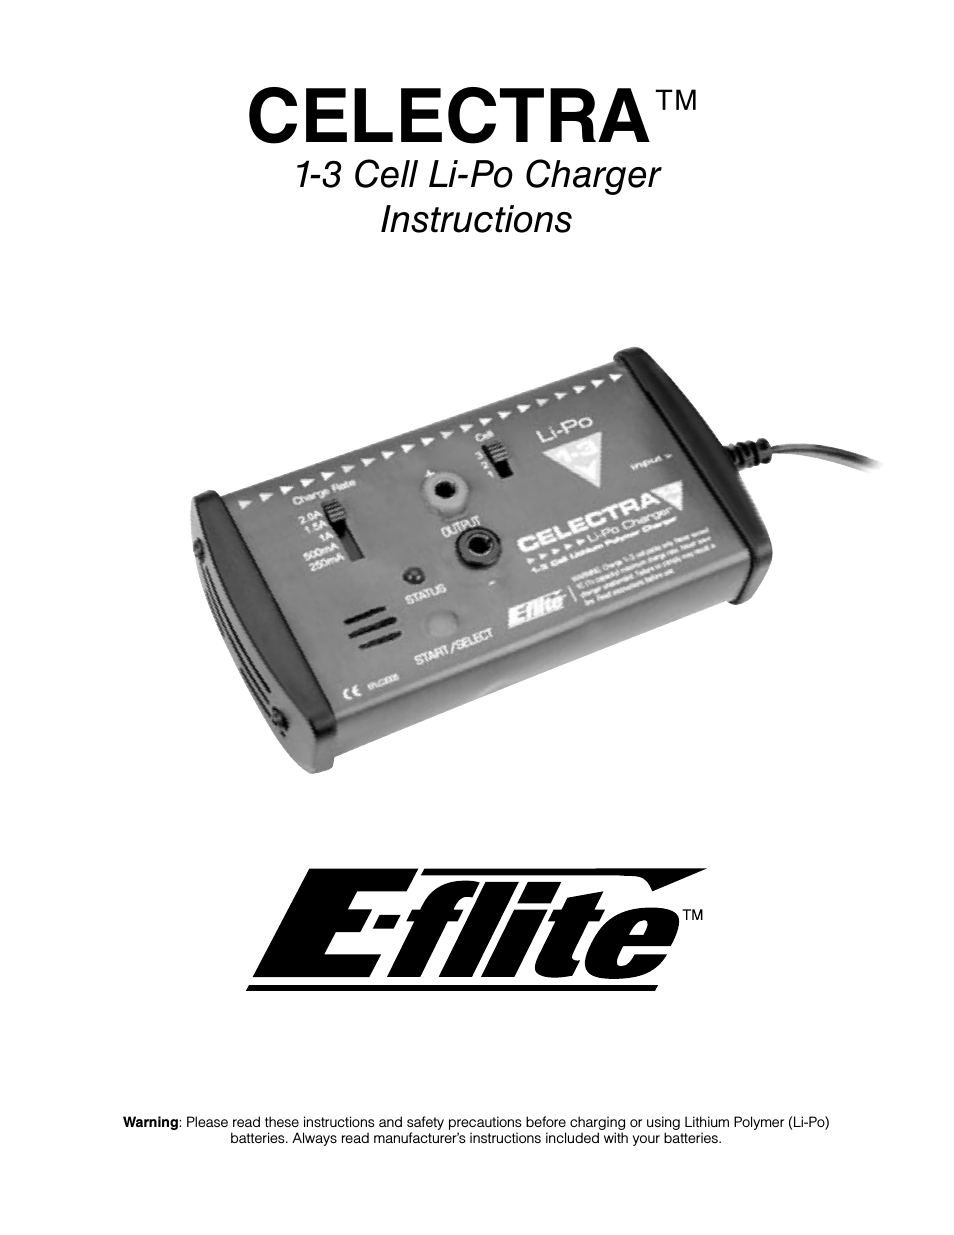 Celectra 1-3 Cell LiPo DC Charger